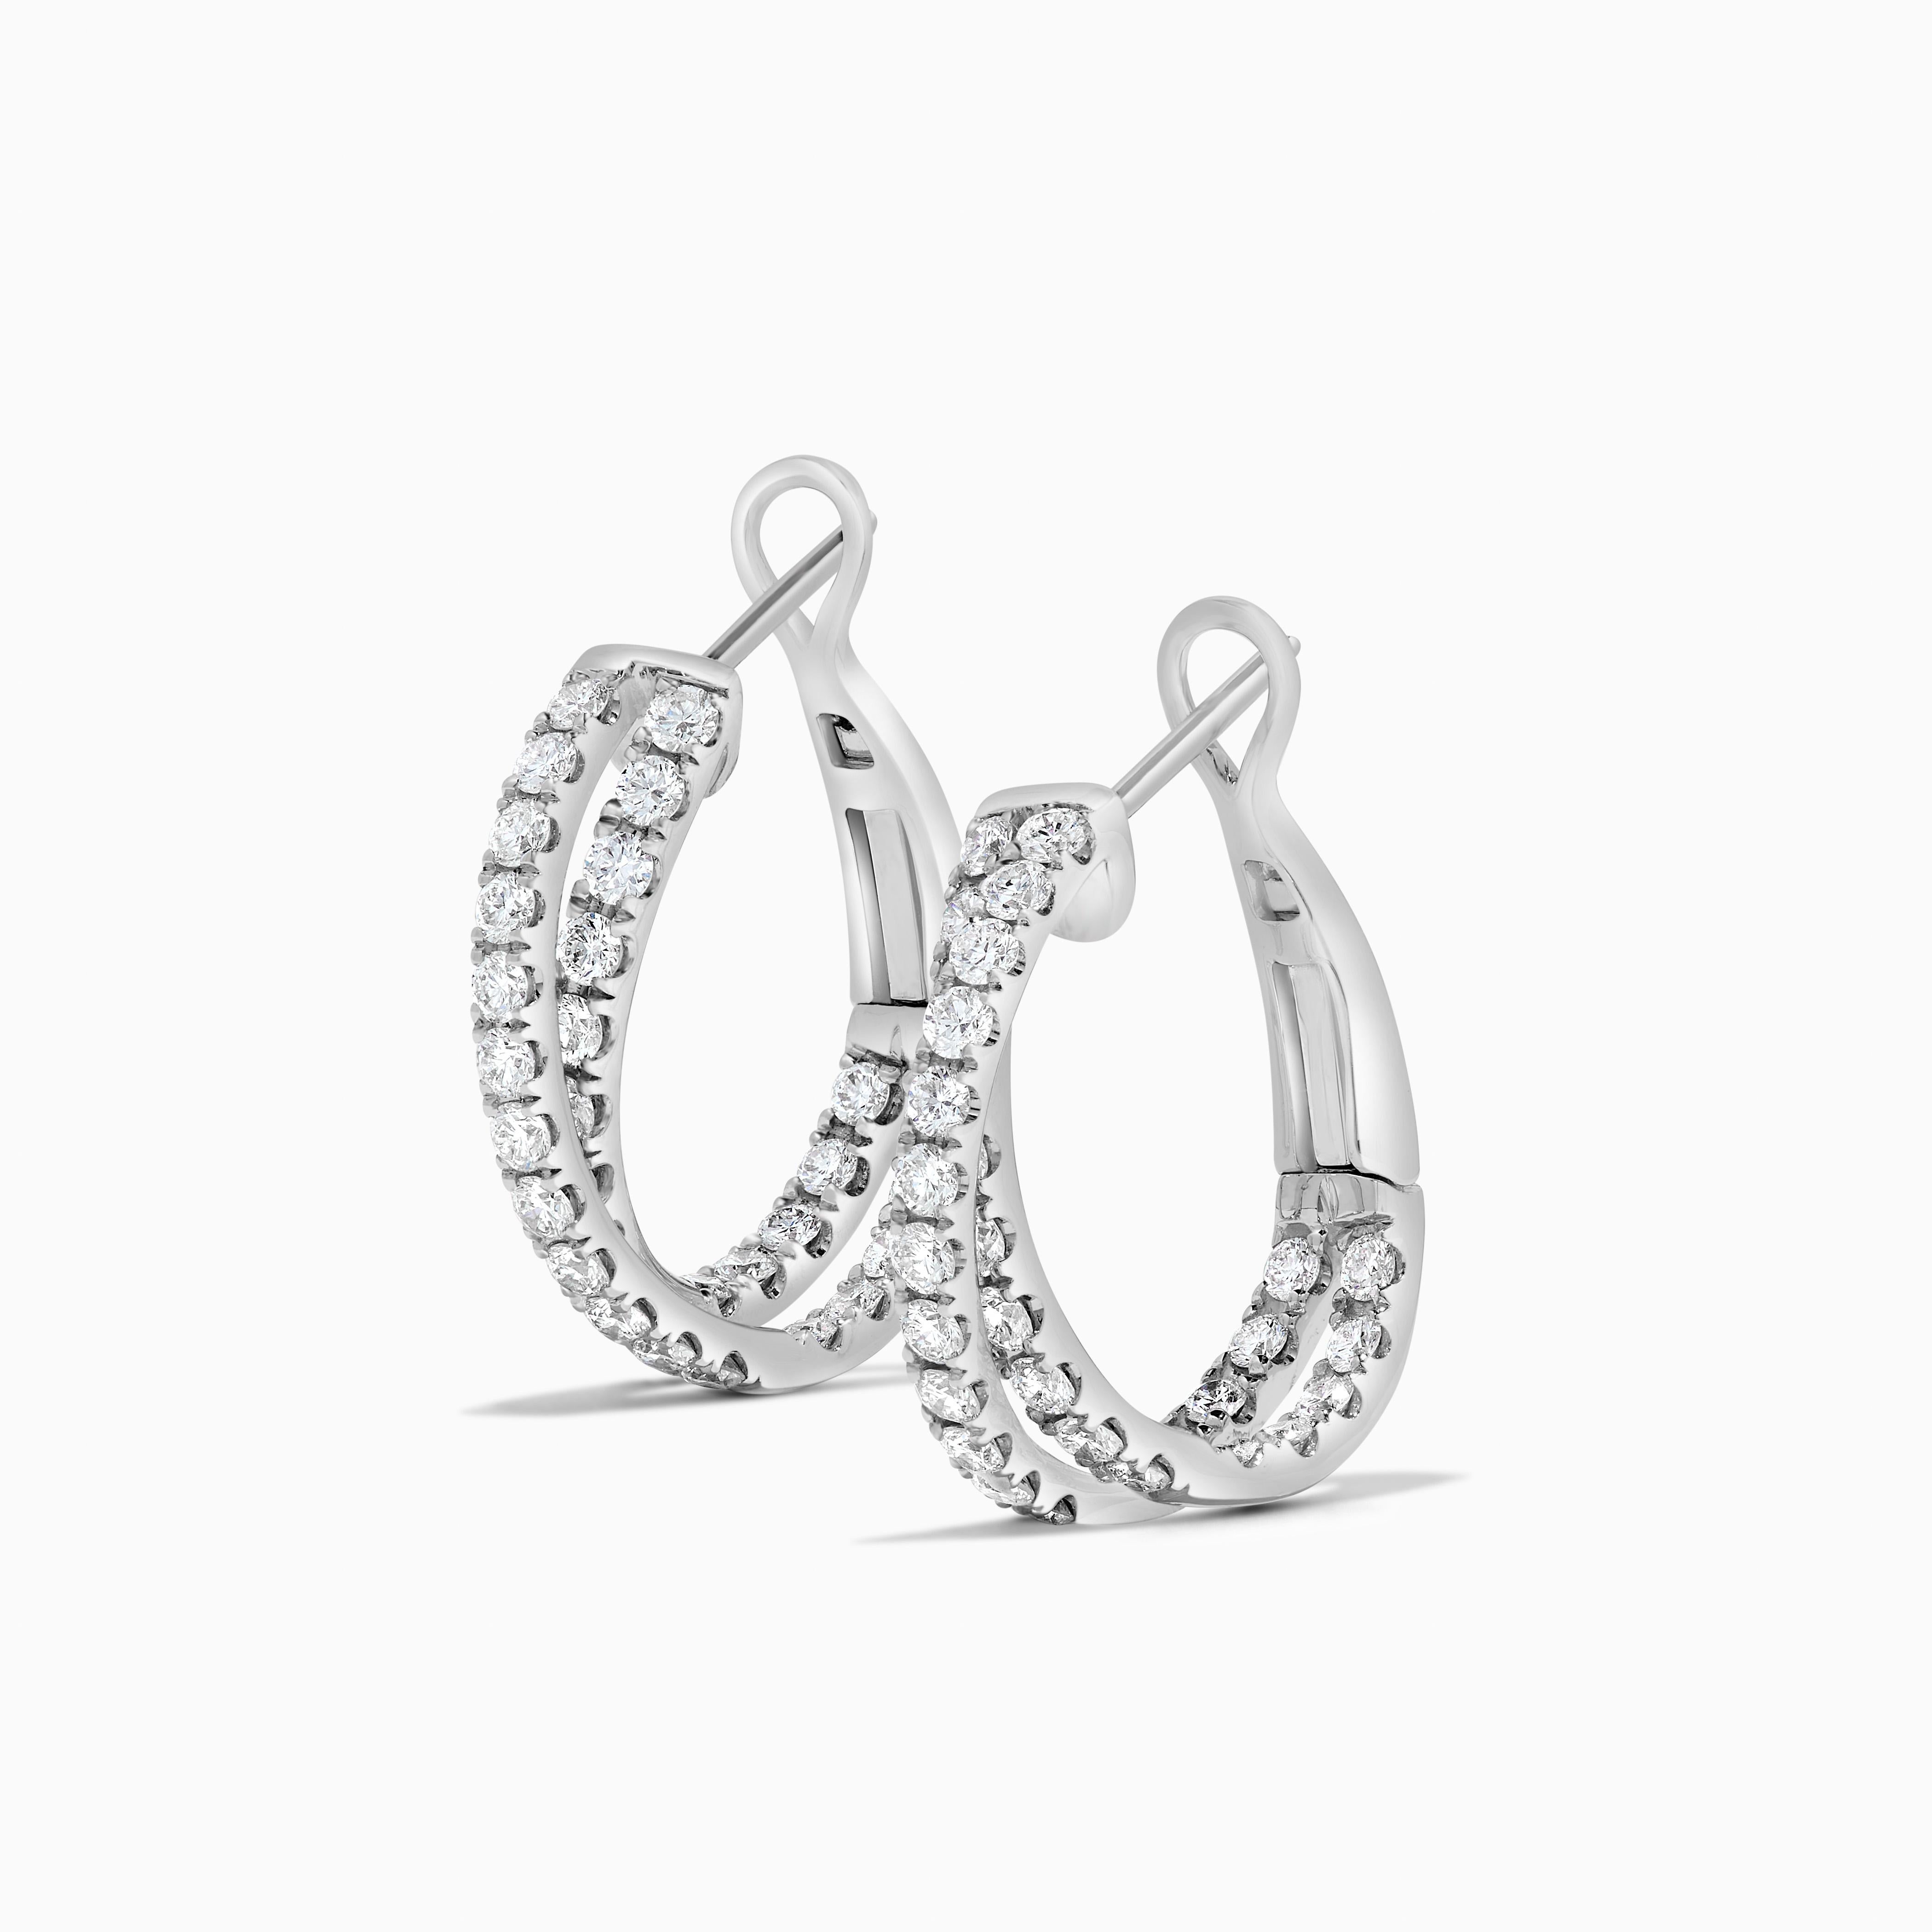 Contemporary Natural White Round Diamond 1.66 Carat TW White Gold Hoop Earrings For Sale